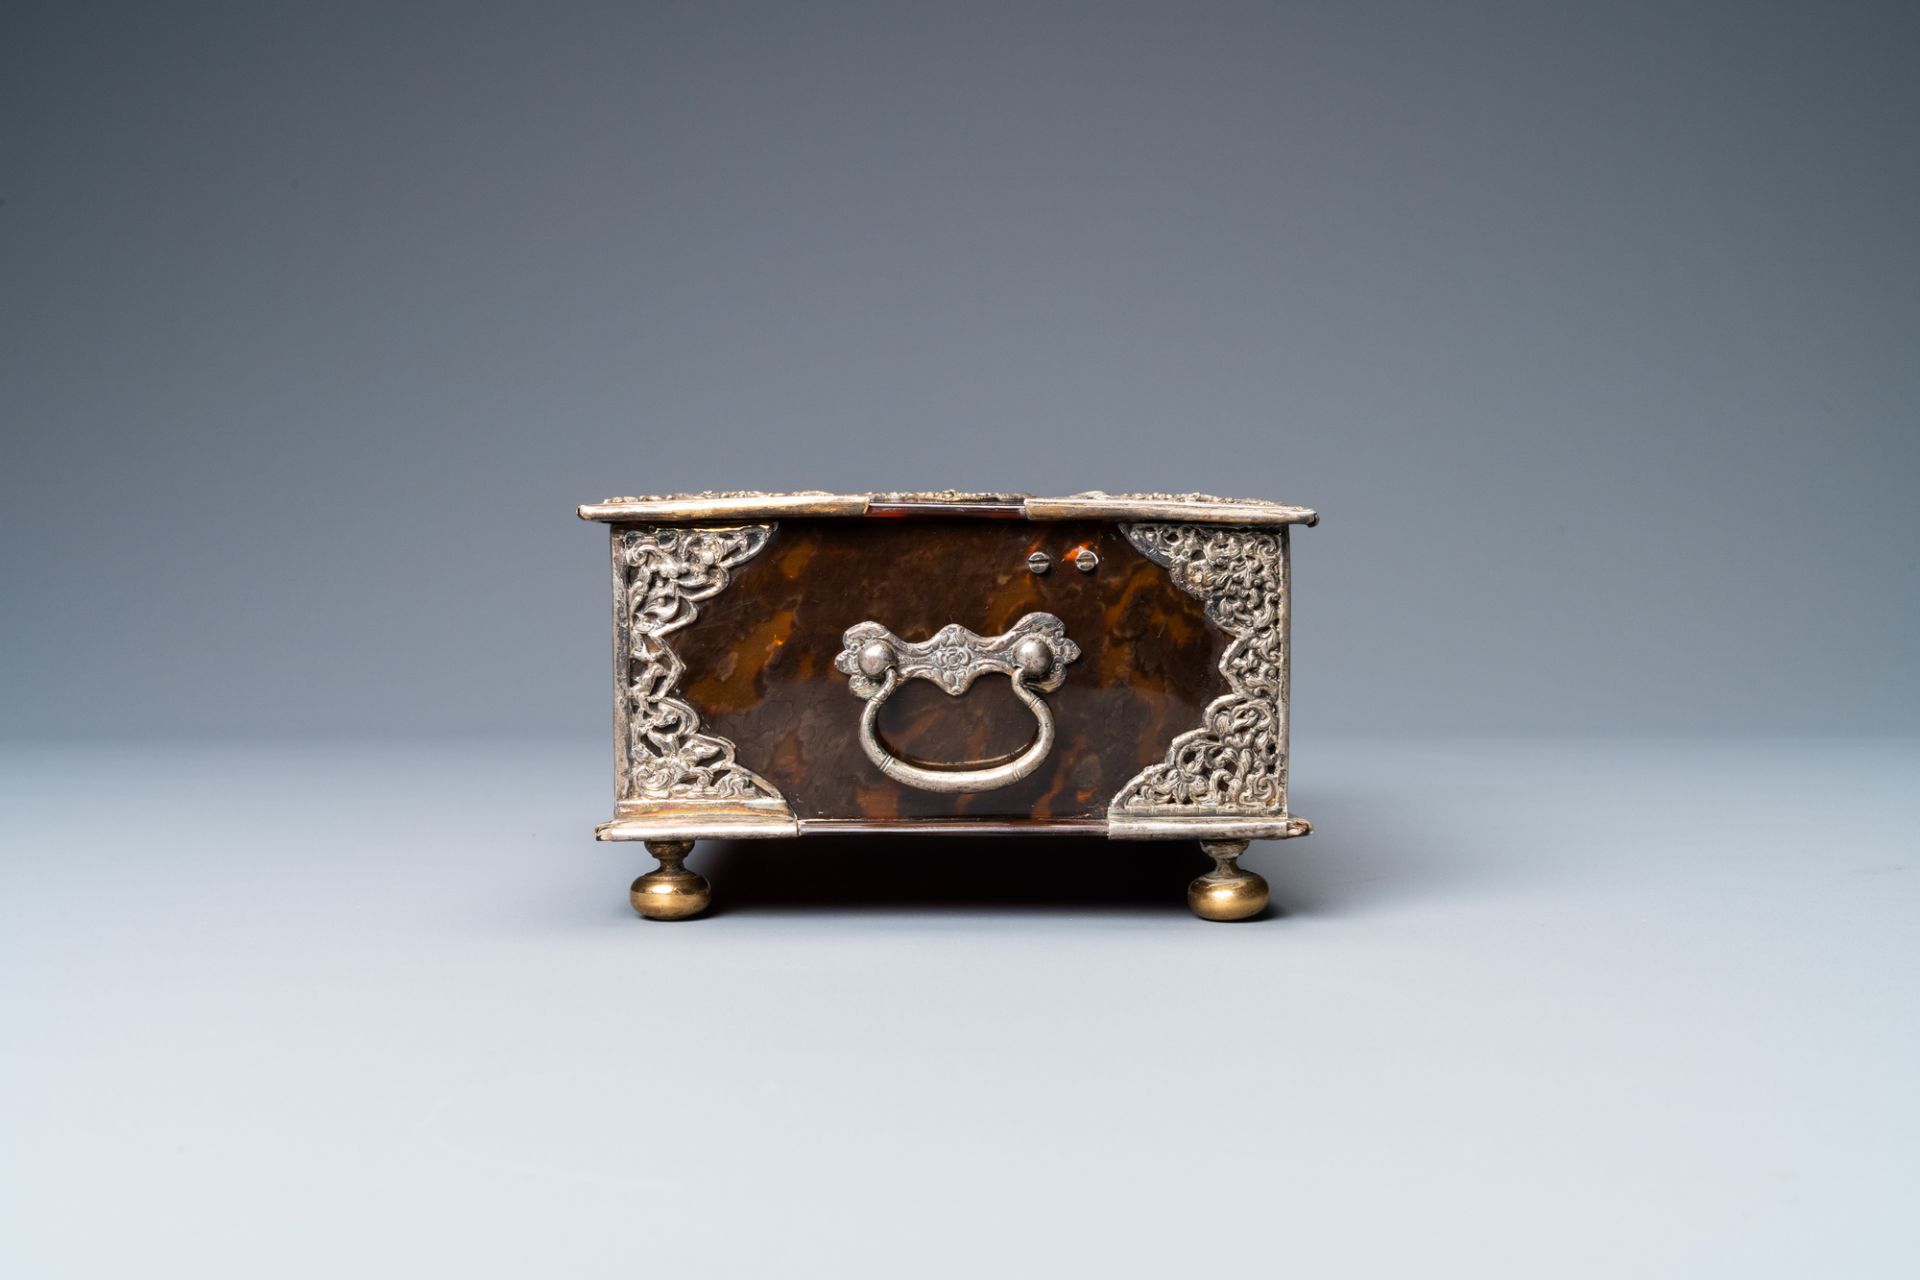 A Dutch colonial silver-mounted tortoise shell sirih casket, ca. 1700 - Image 6 of 10